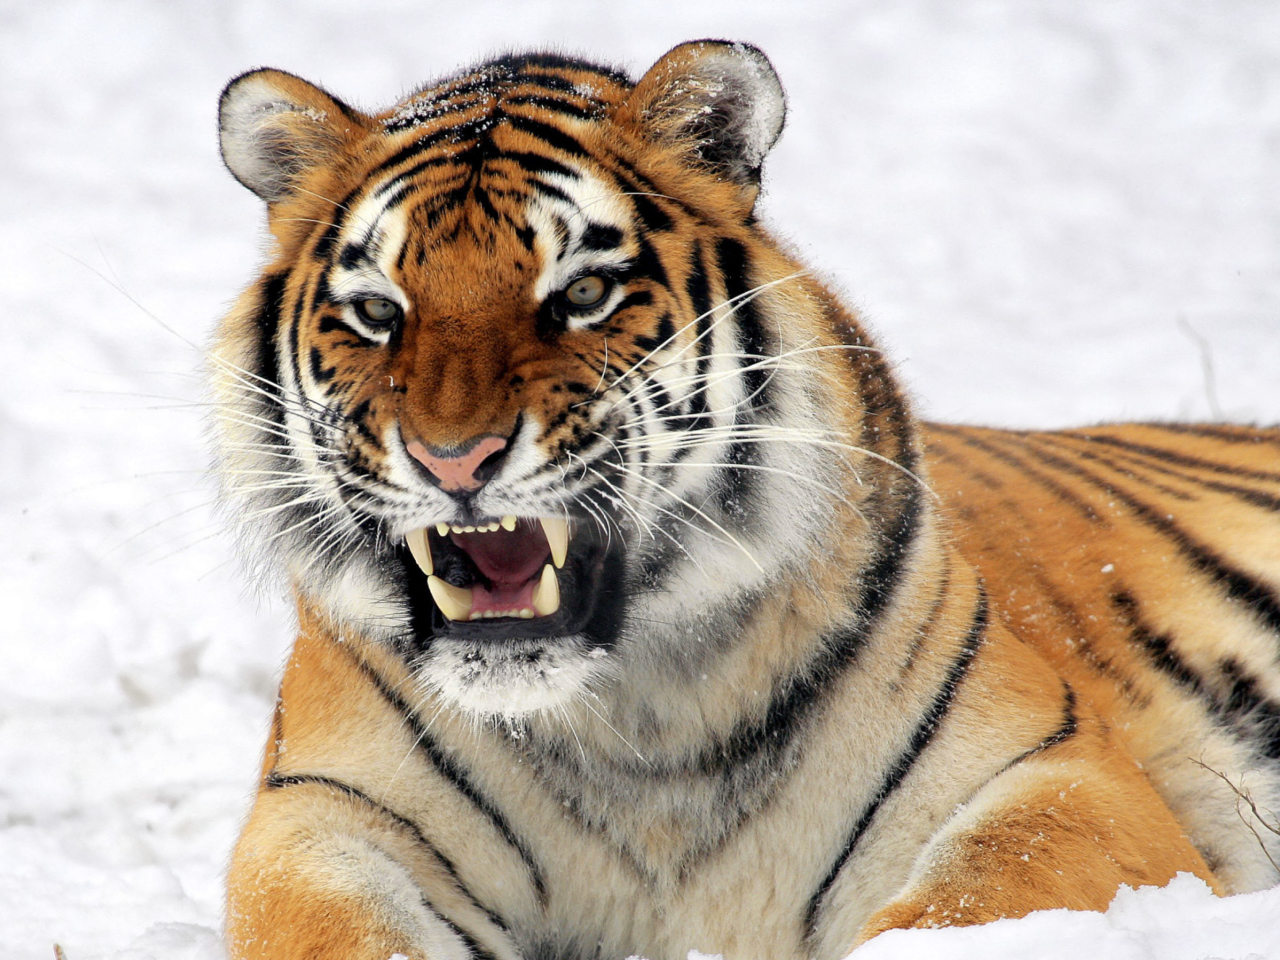 Tiger In The Snow wallpaper 1280x960